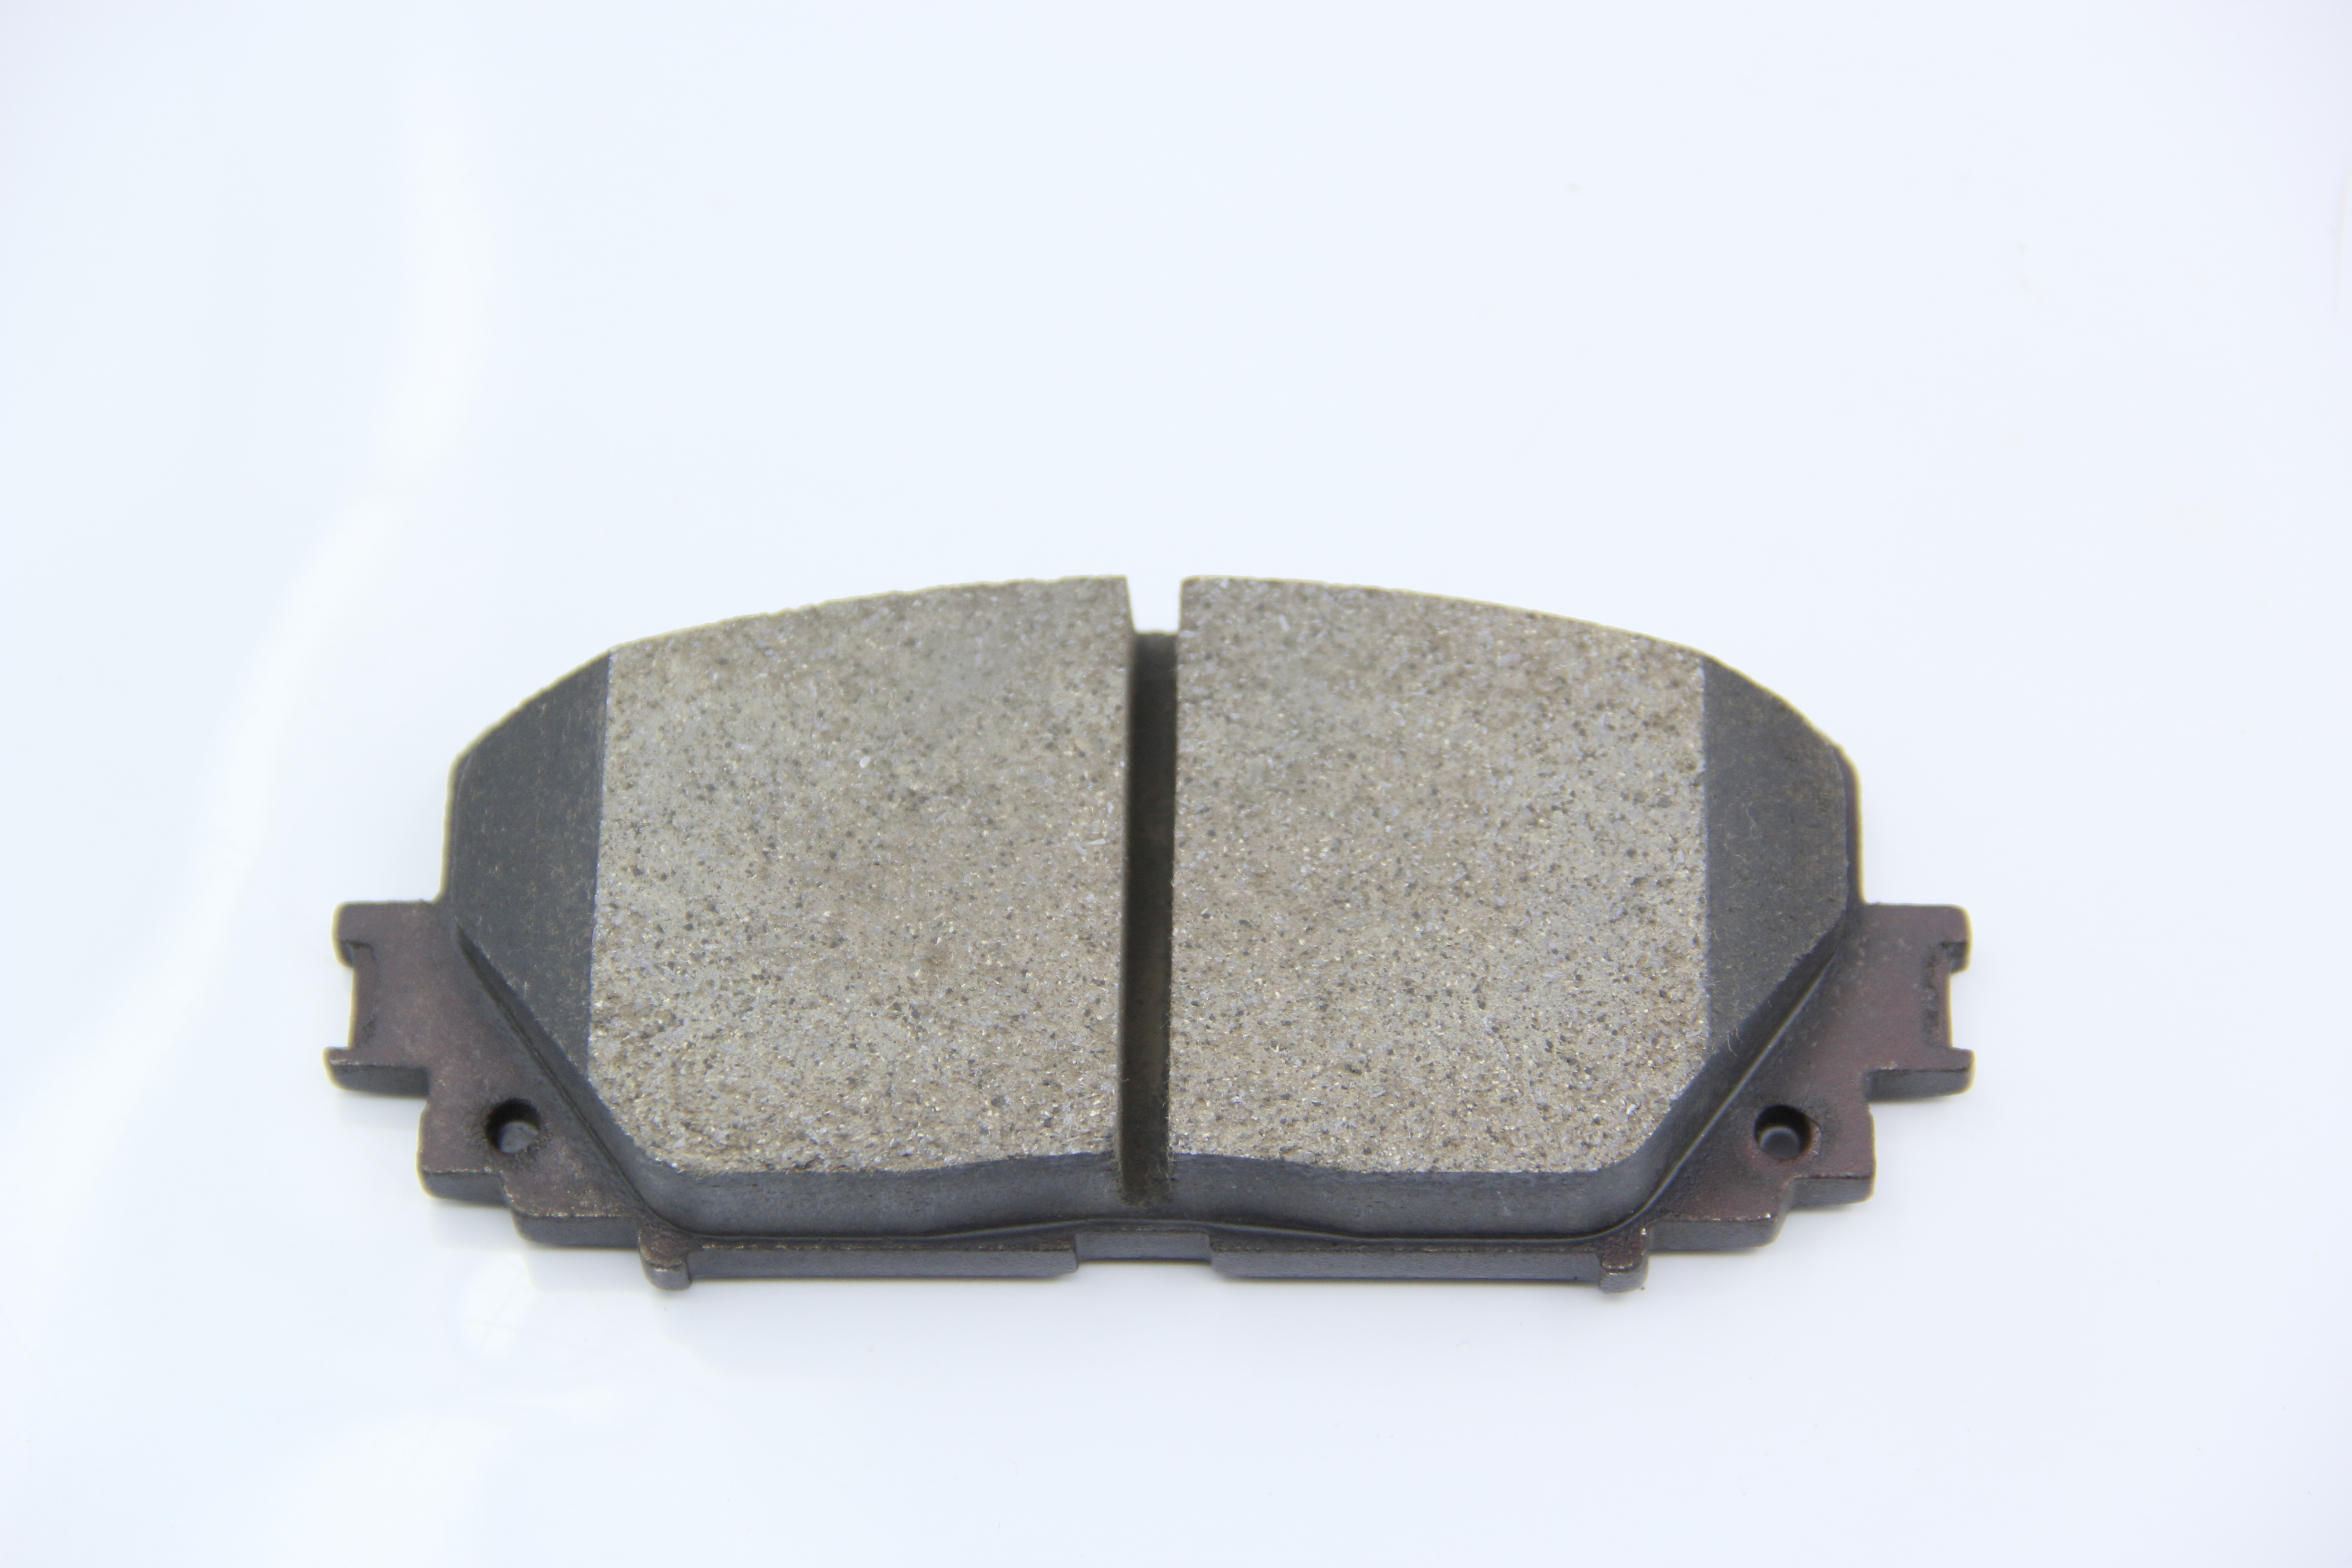 New research sheds light on the lifespan of ceramic brake pads: How long should they last?